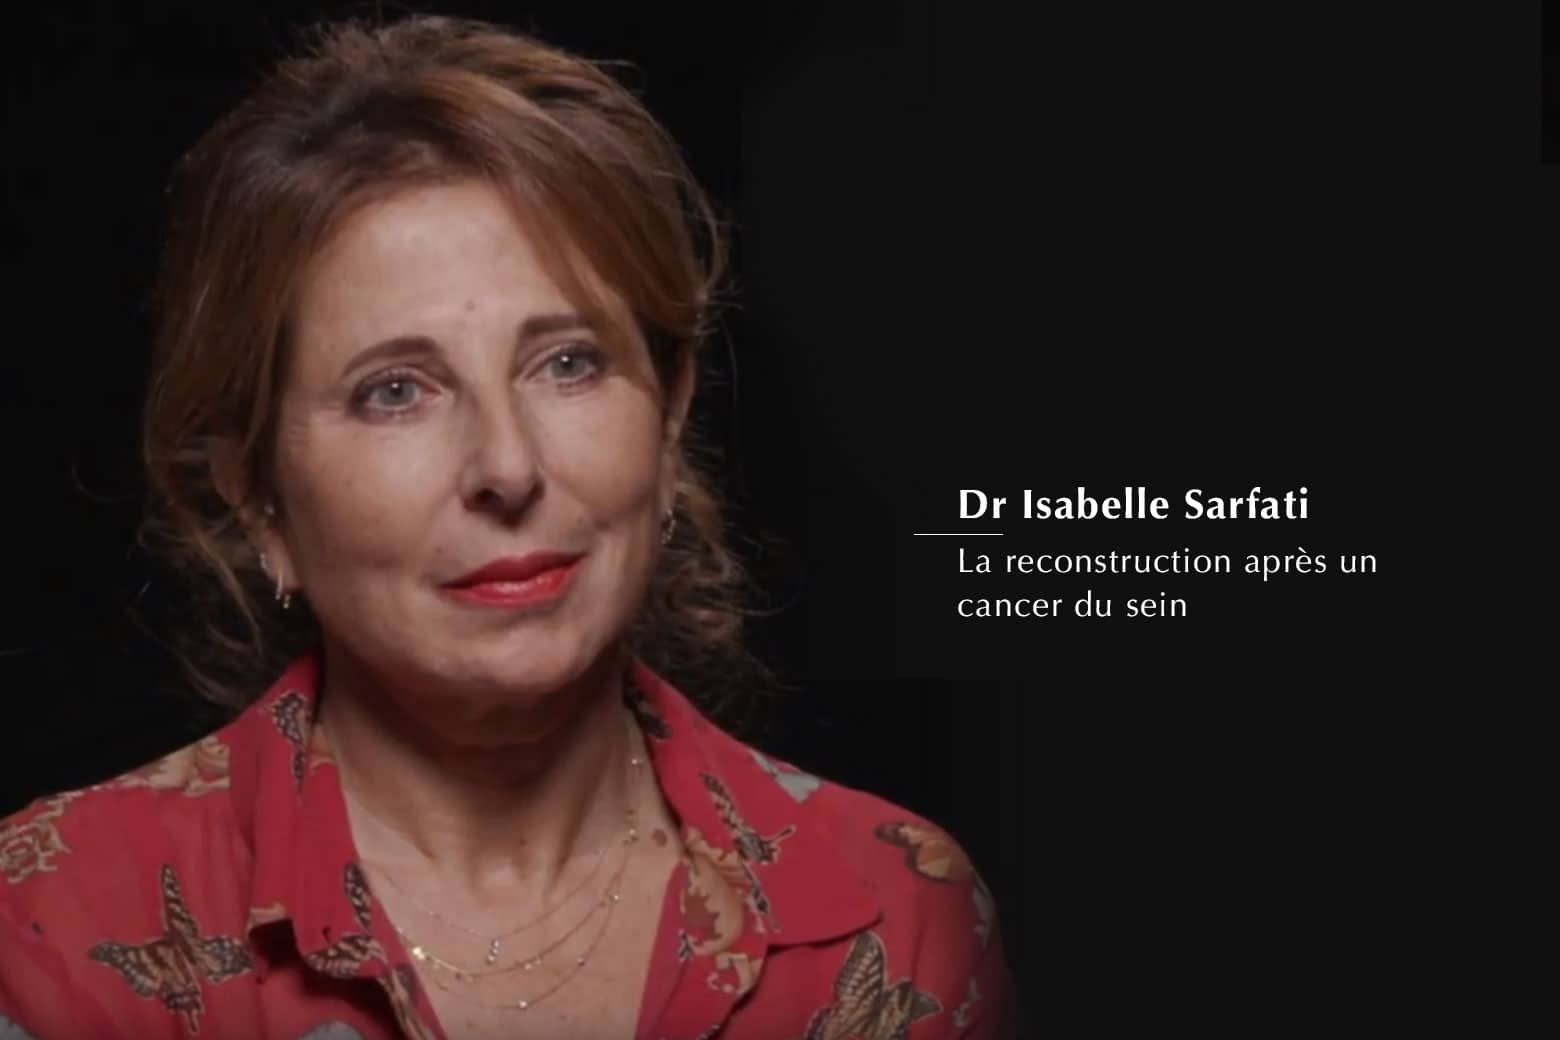 Dr ISABELLE SARFATI - Reconstruction after breast cancer